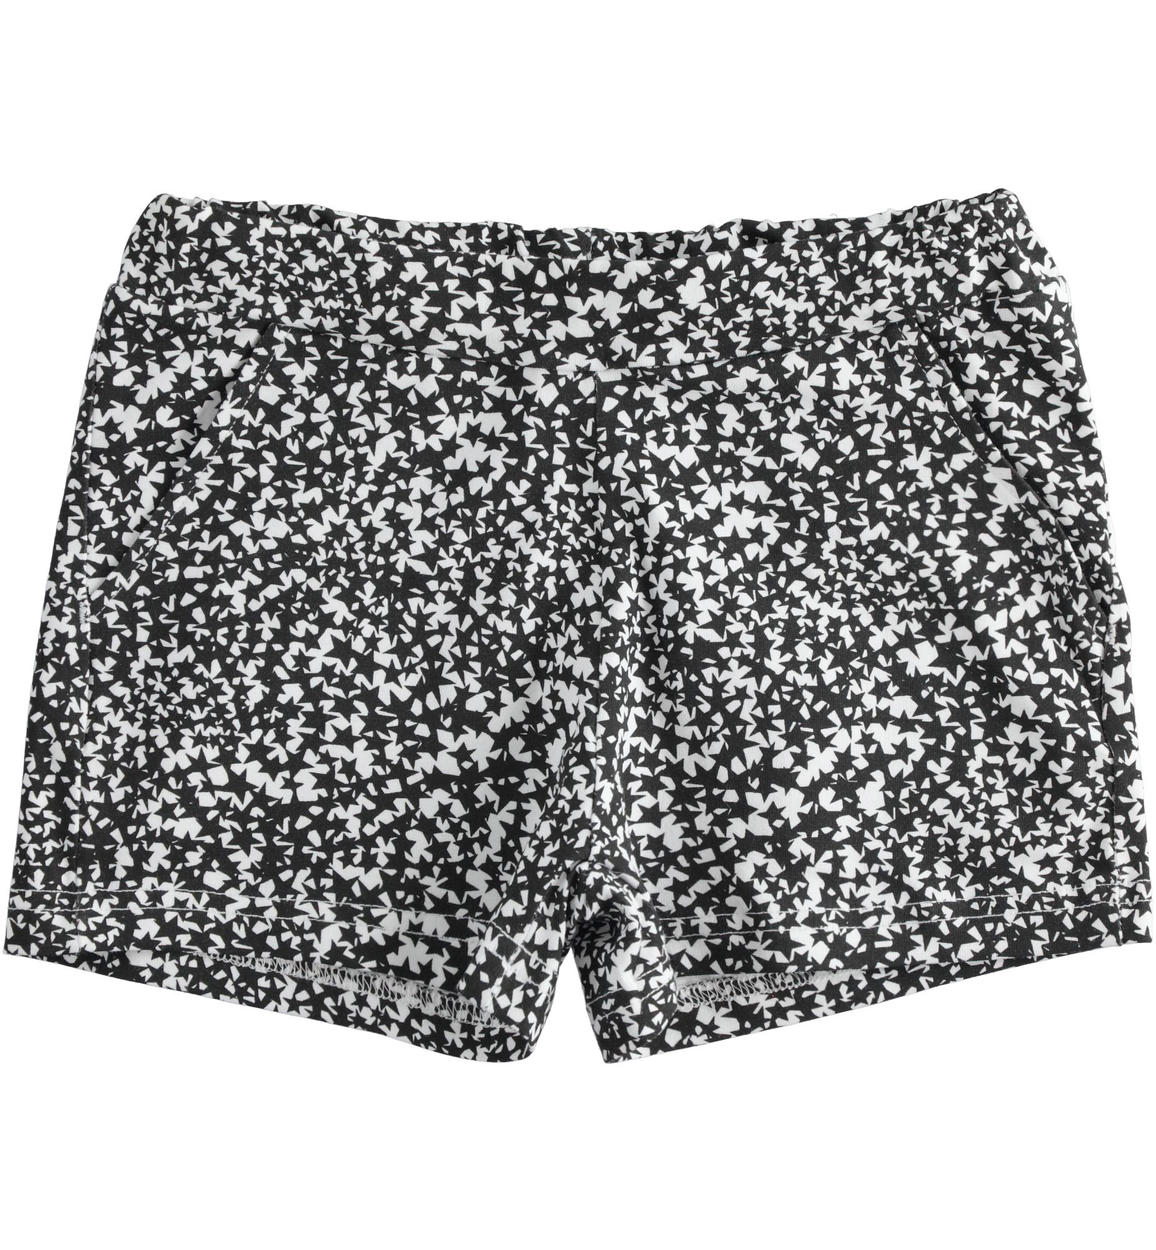 Shorts bambina in jersey stretch stampa all over NERO iDO